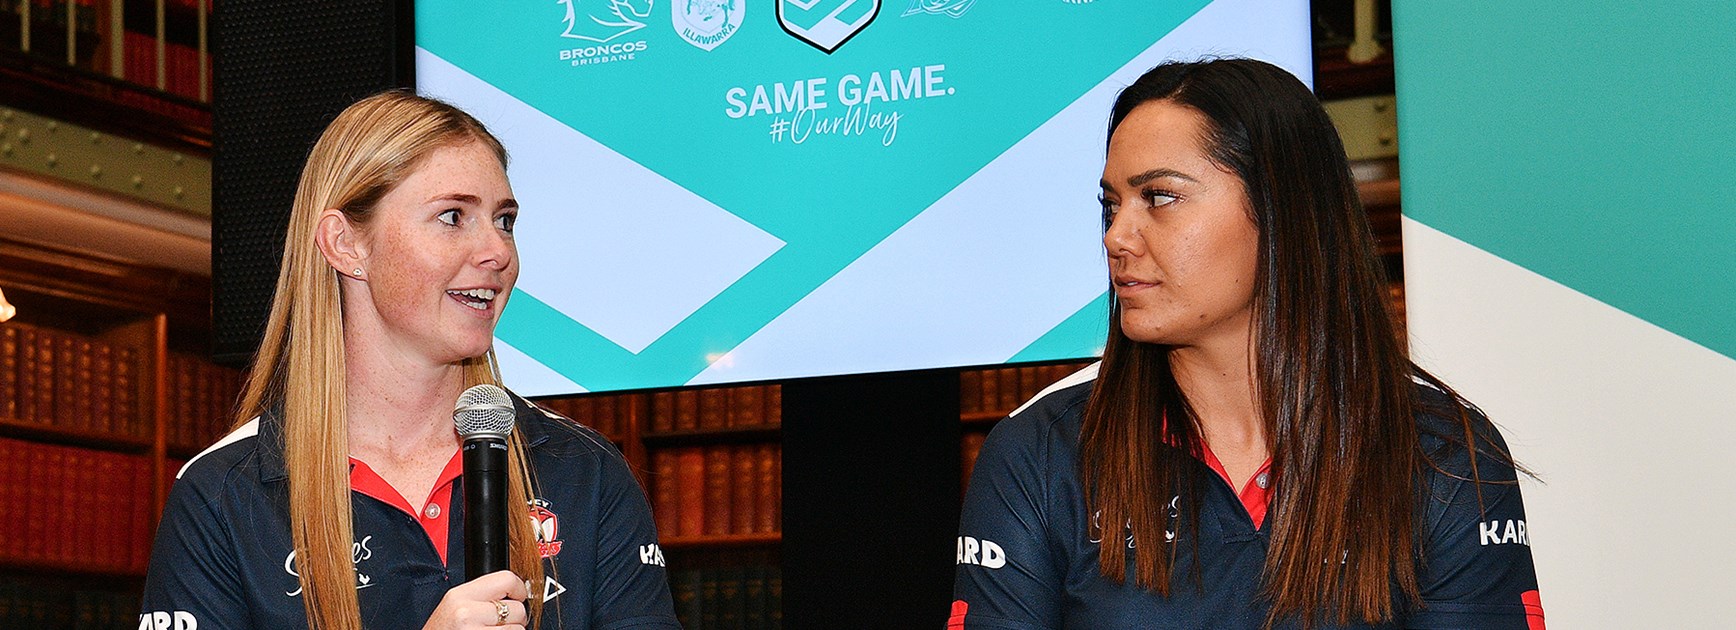 Roosters women find sense of belonging with support from big names